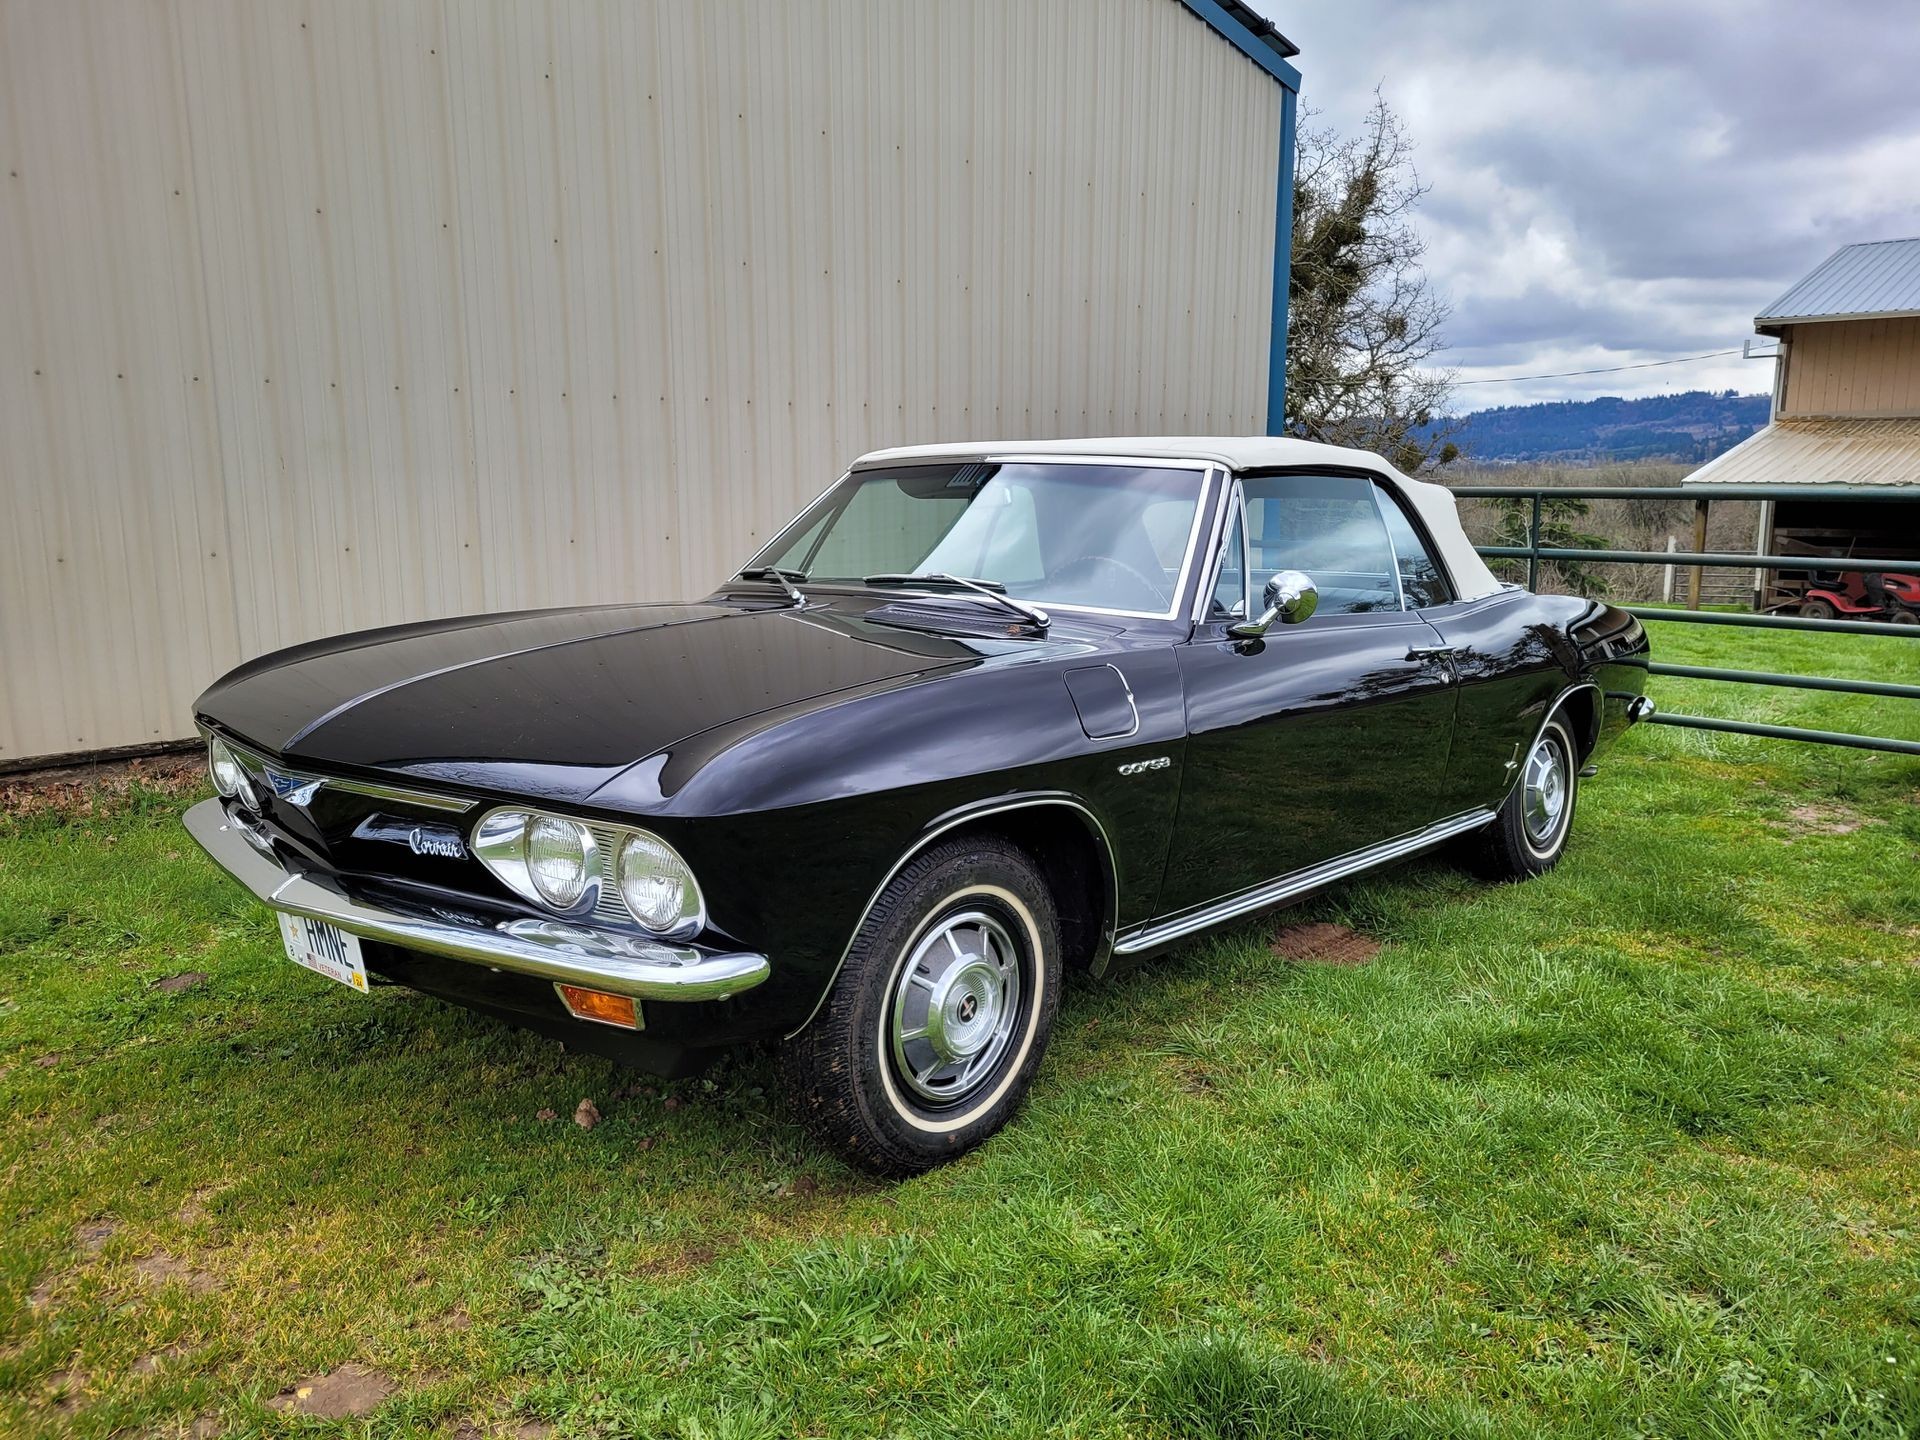 Hemmings Auction Hammers Down a 1966 Chevrolet Corvair Corsa Convertible Record Sale